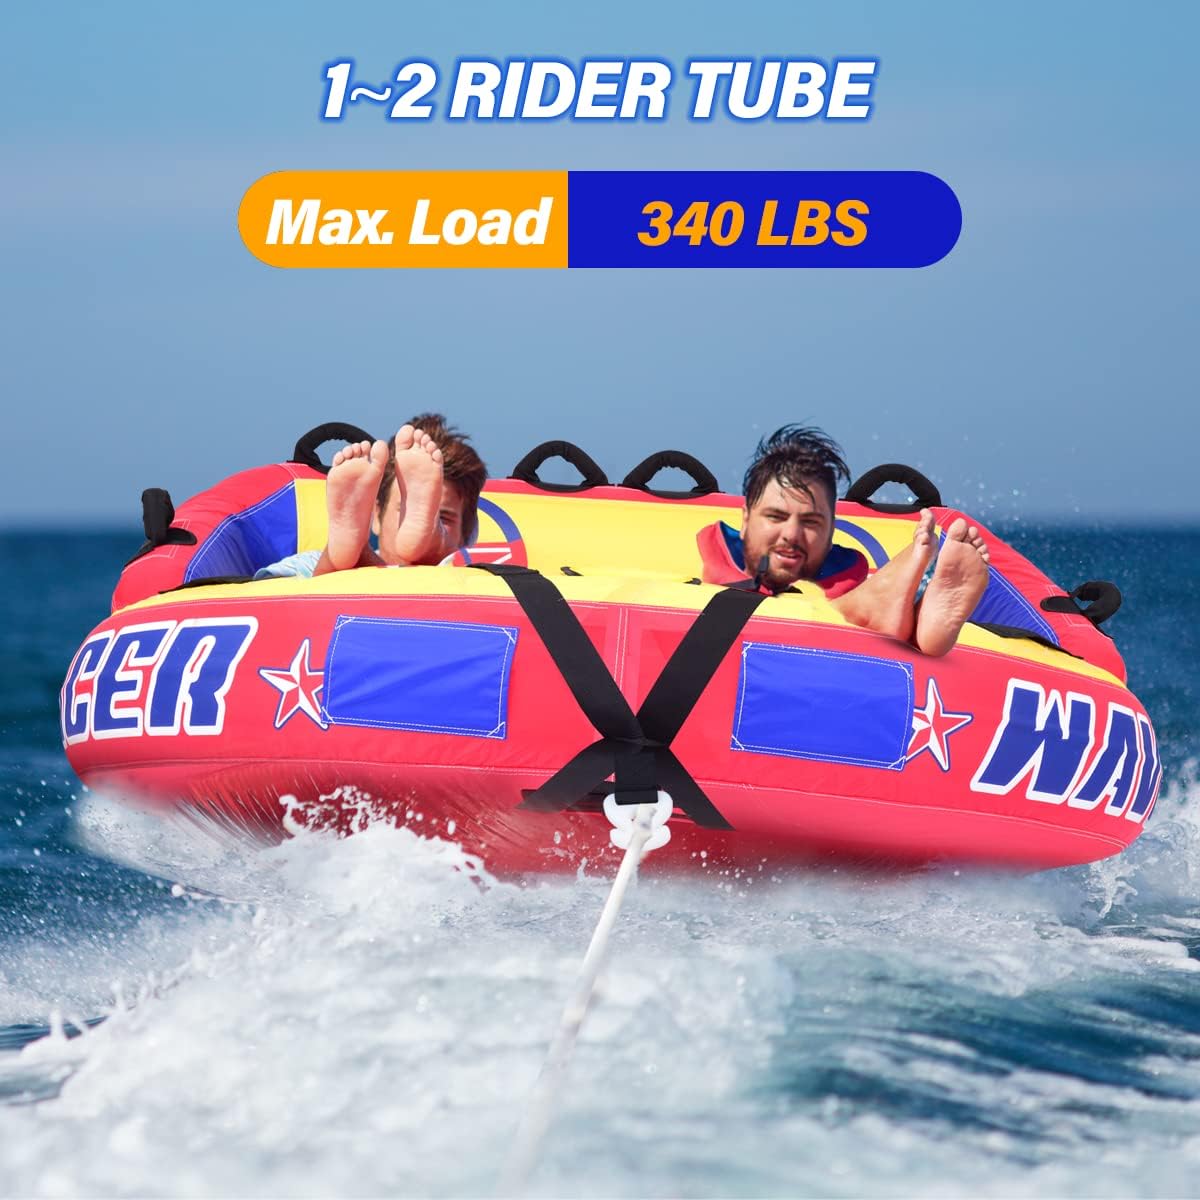 MewVeer Towable Tube for Boating, Safety Inflatable Boat Tubes and Towables, 1~2 Person Foam Seats, Water Sport Towables with Drainage, Quick Connector, Large Capacity